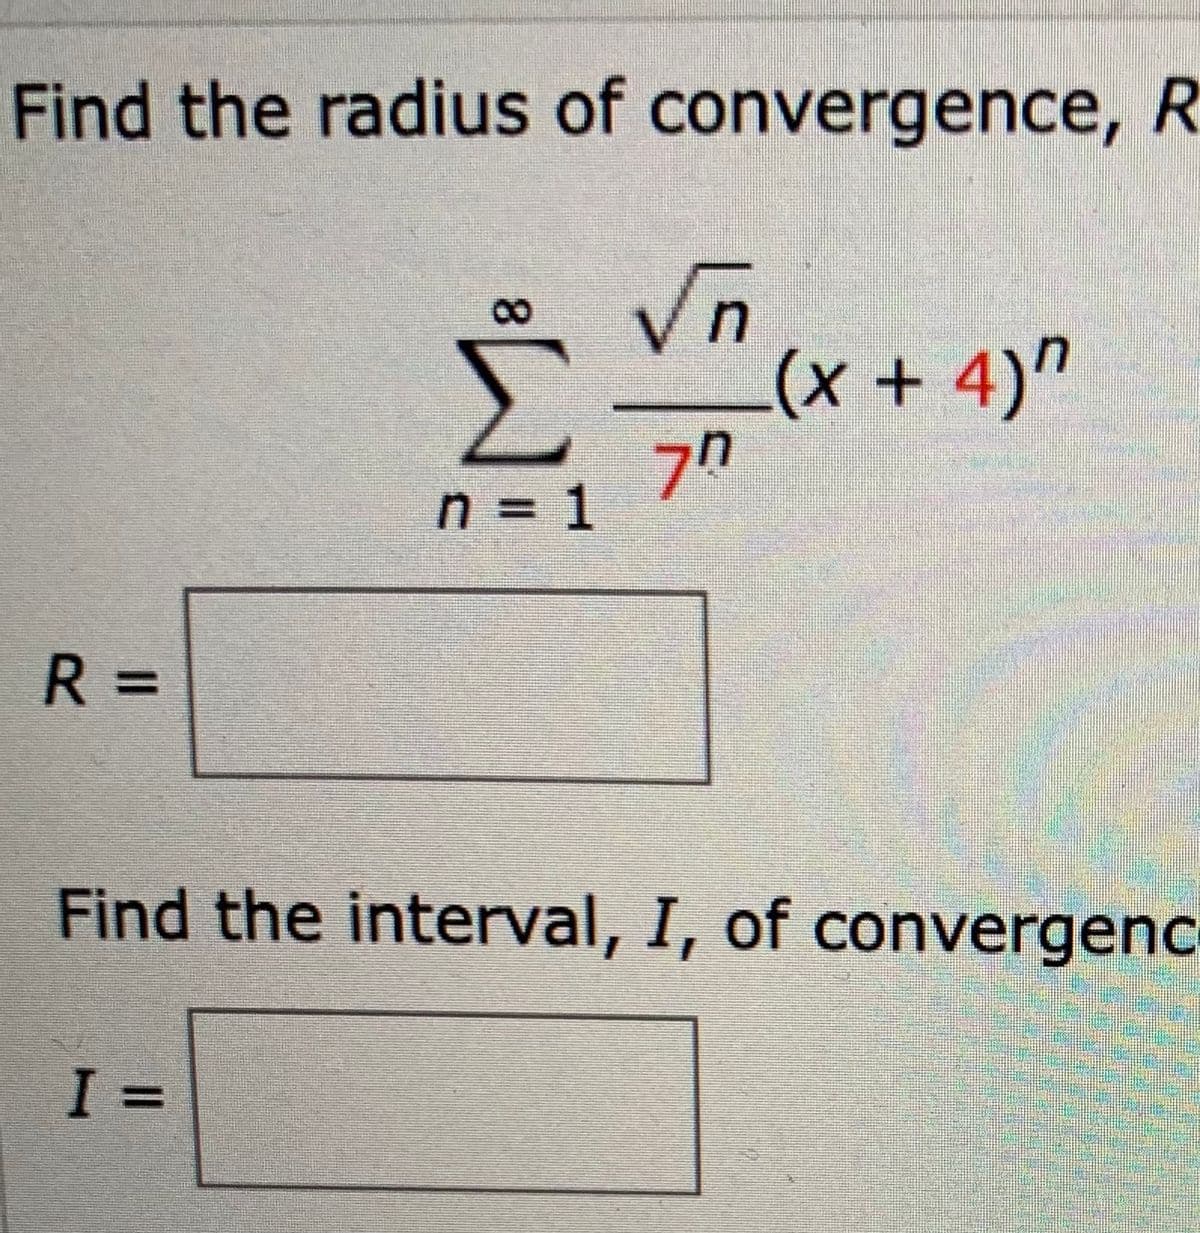 Find the radius of convergence, R
8.
Σ
(x + 4)"
70
n = 1
%3D
R =
%3D
Find the interval, I, of convergenc
